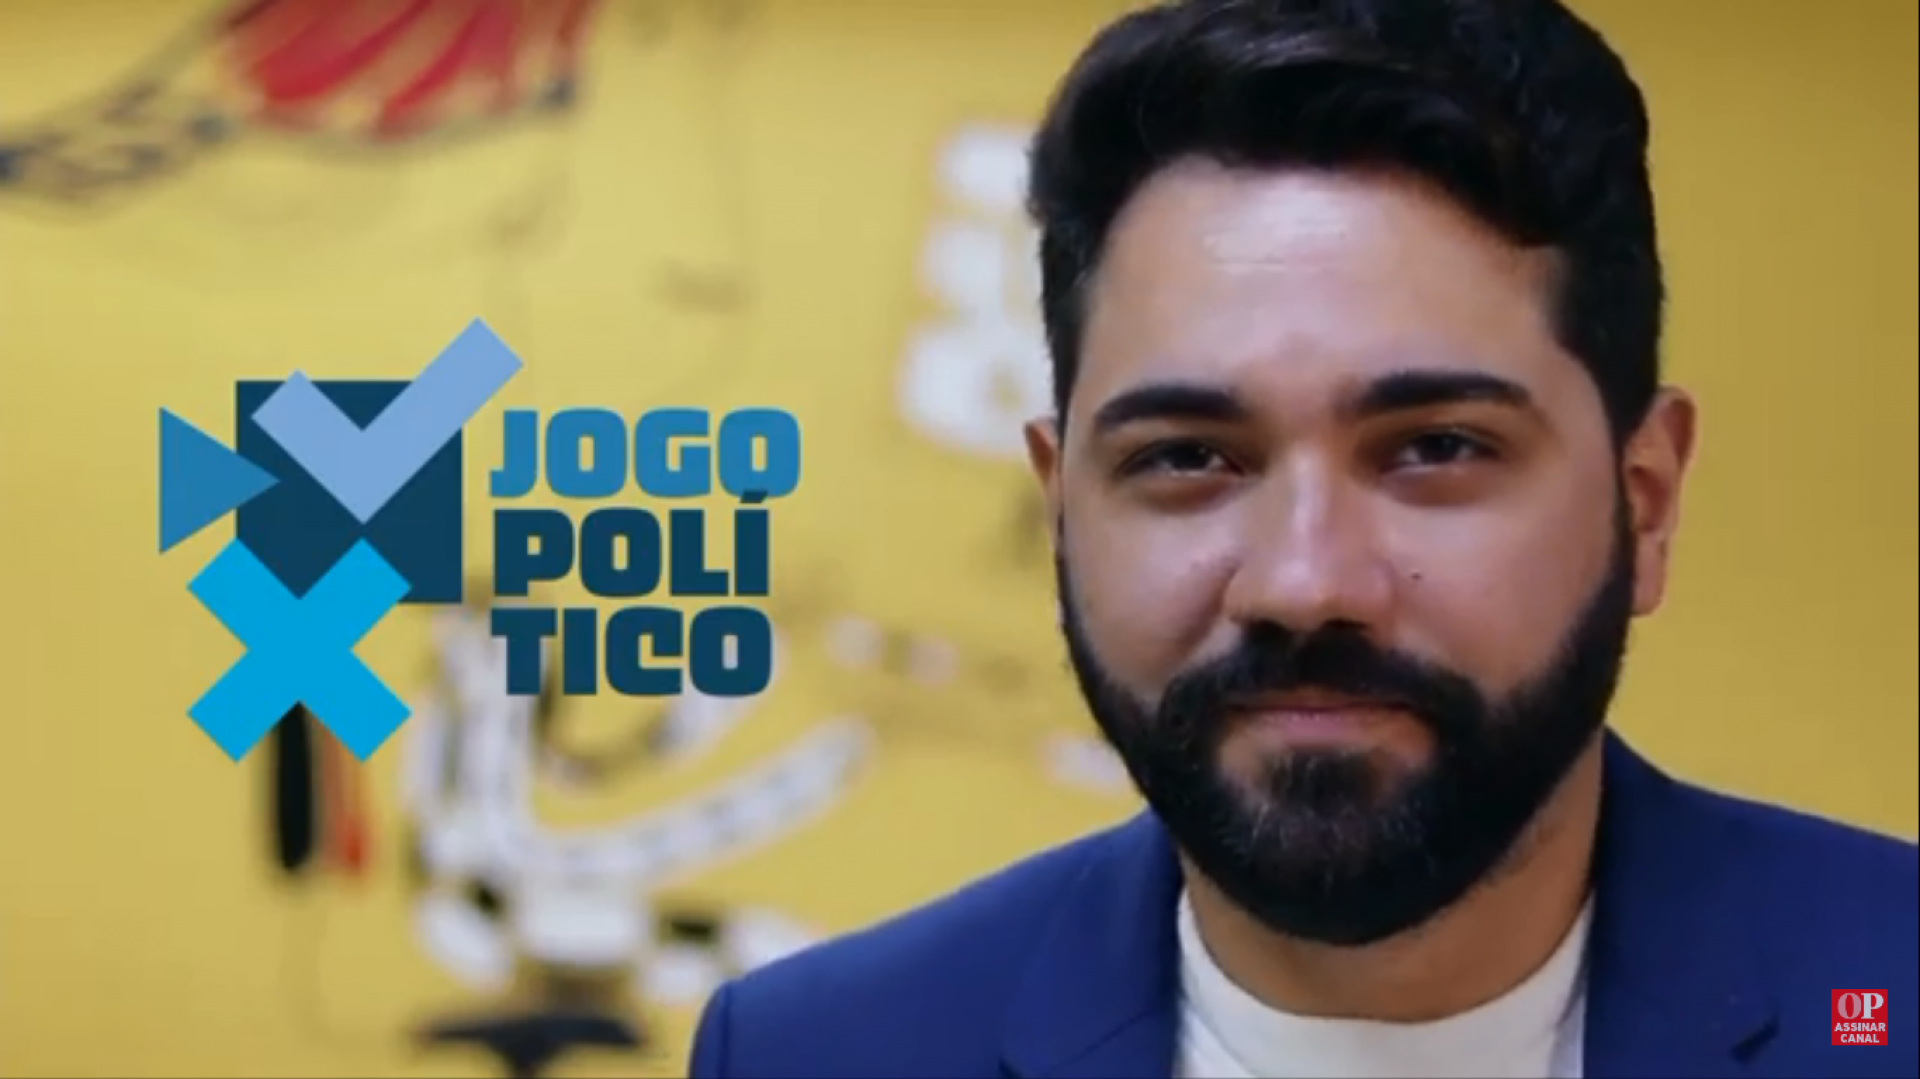 The political game opens on Tuesday 15th, interviews with Flavio Dino and Domingos Neto |  Politics - Breaking news in Fortaleza and Ceara